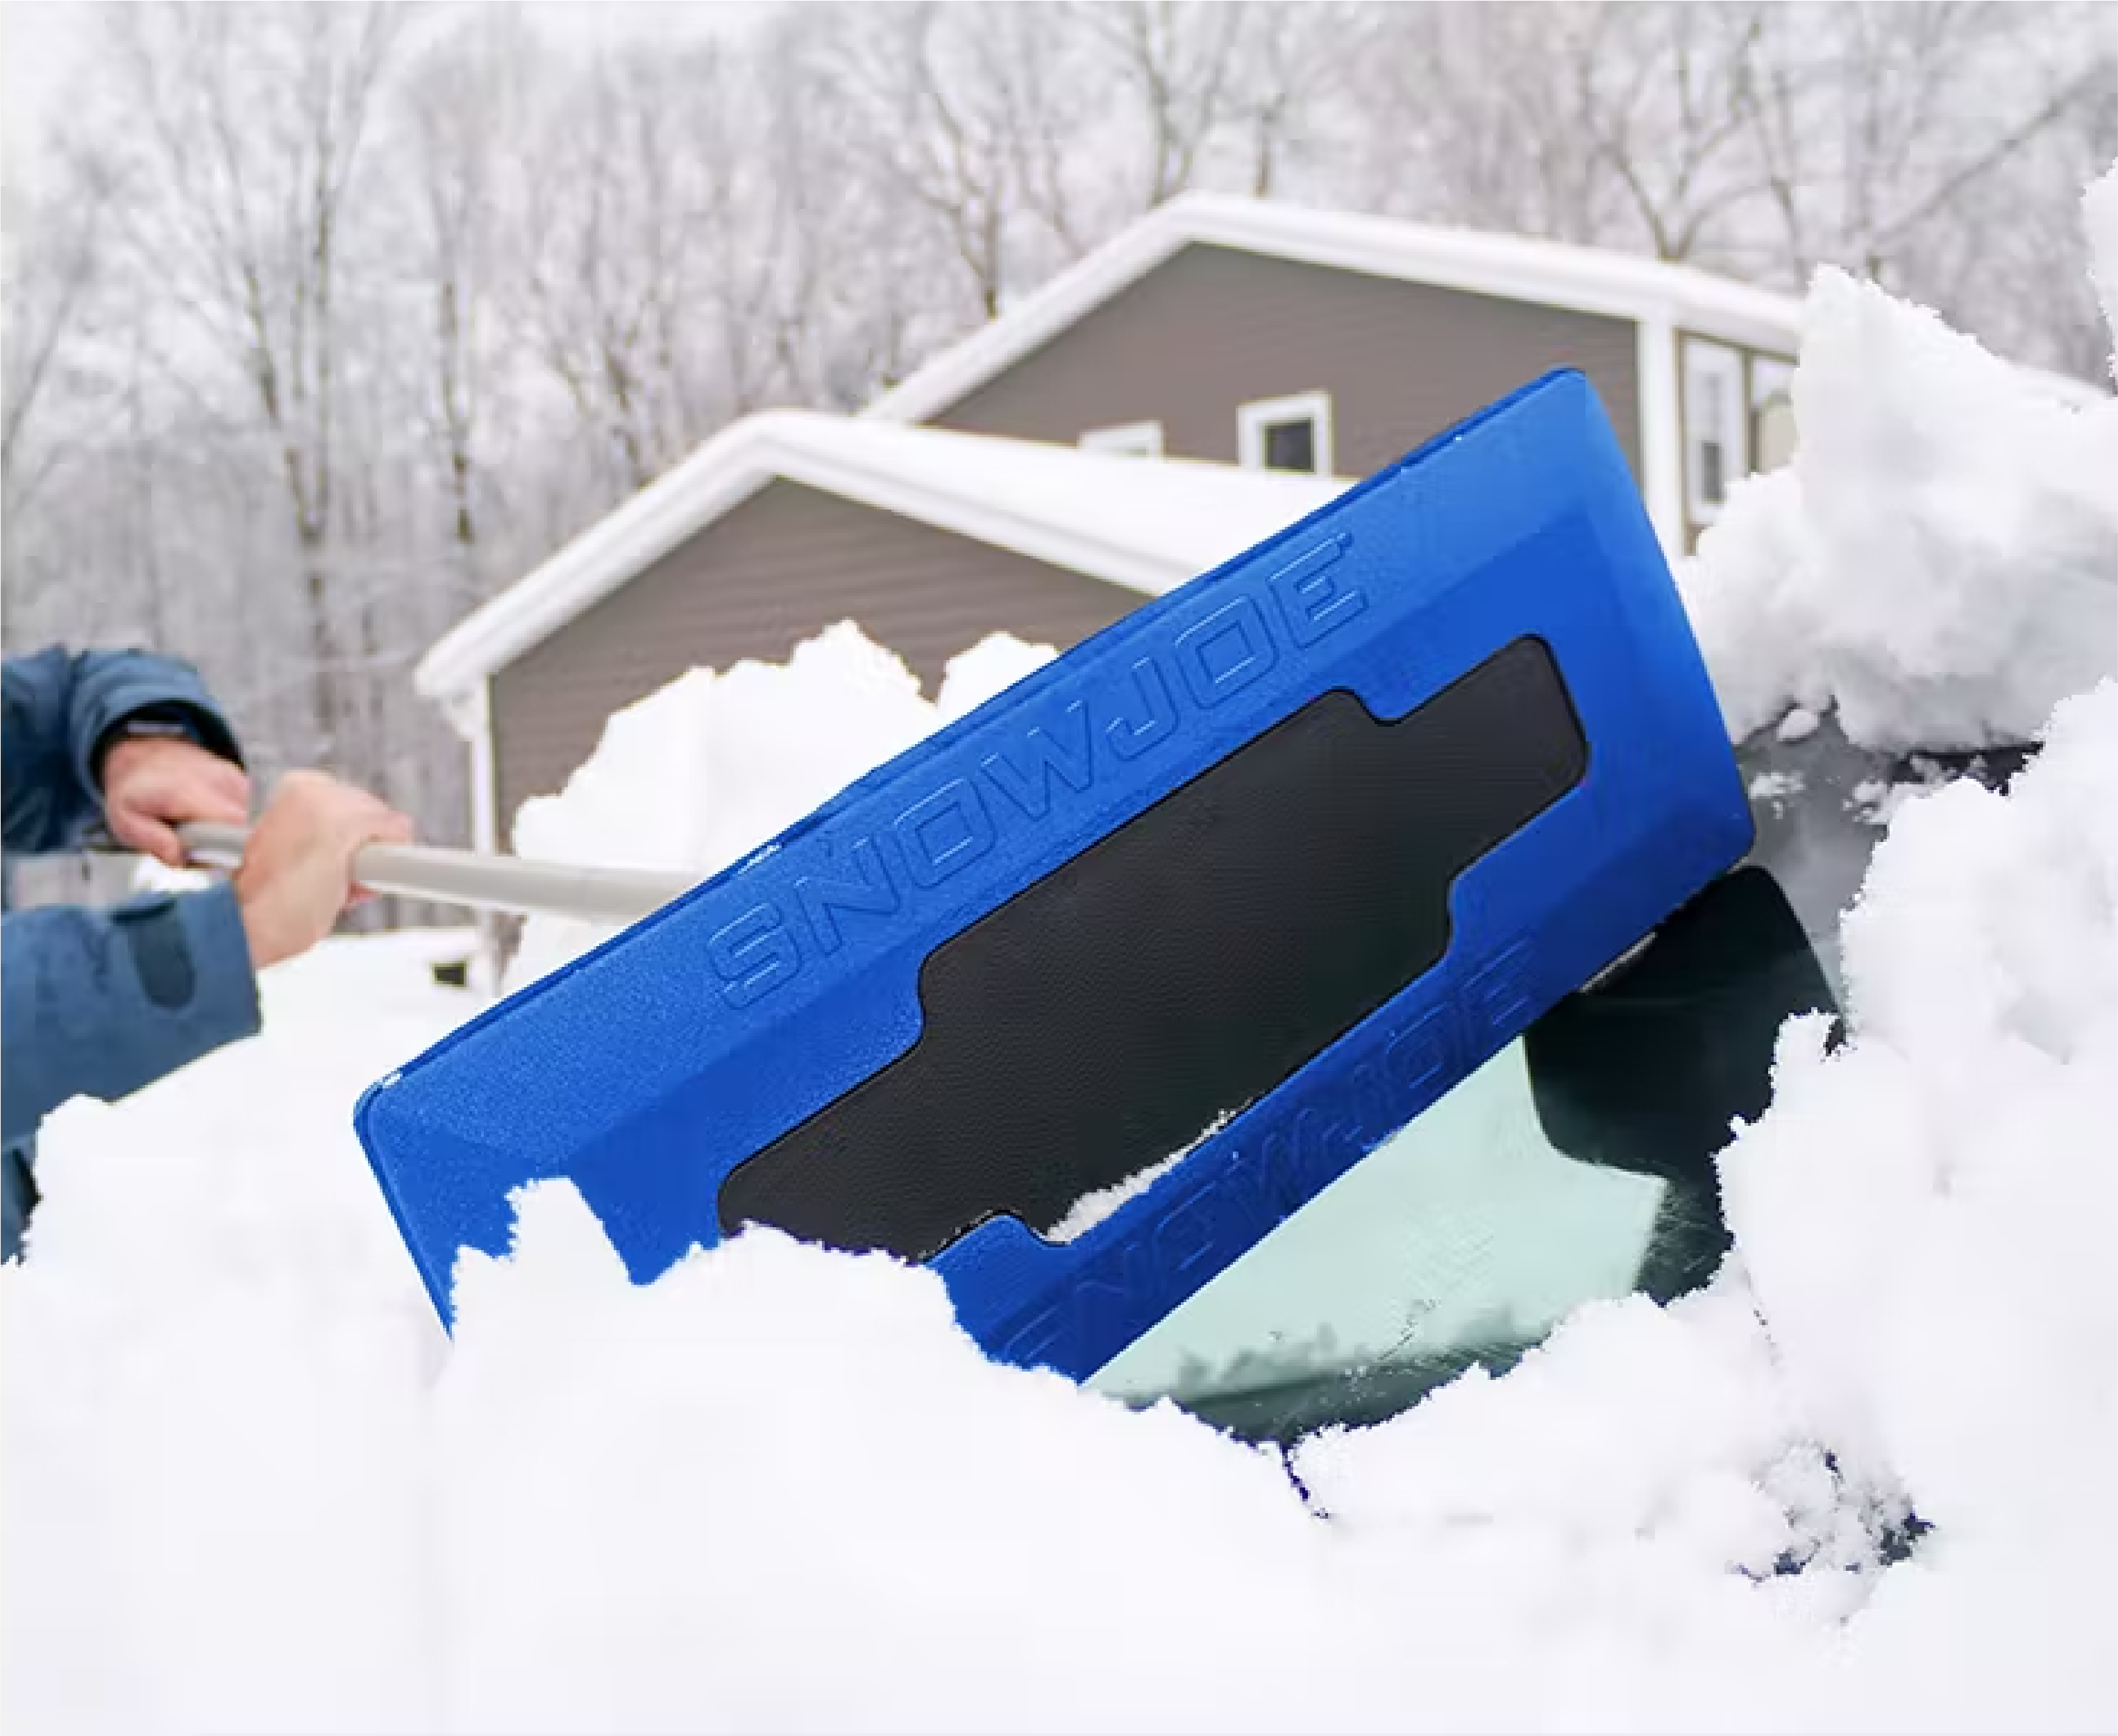 The best ice scrapers to use during winter